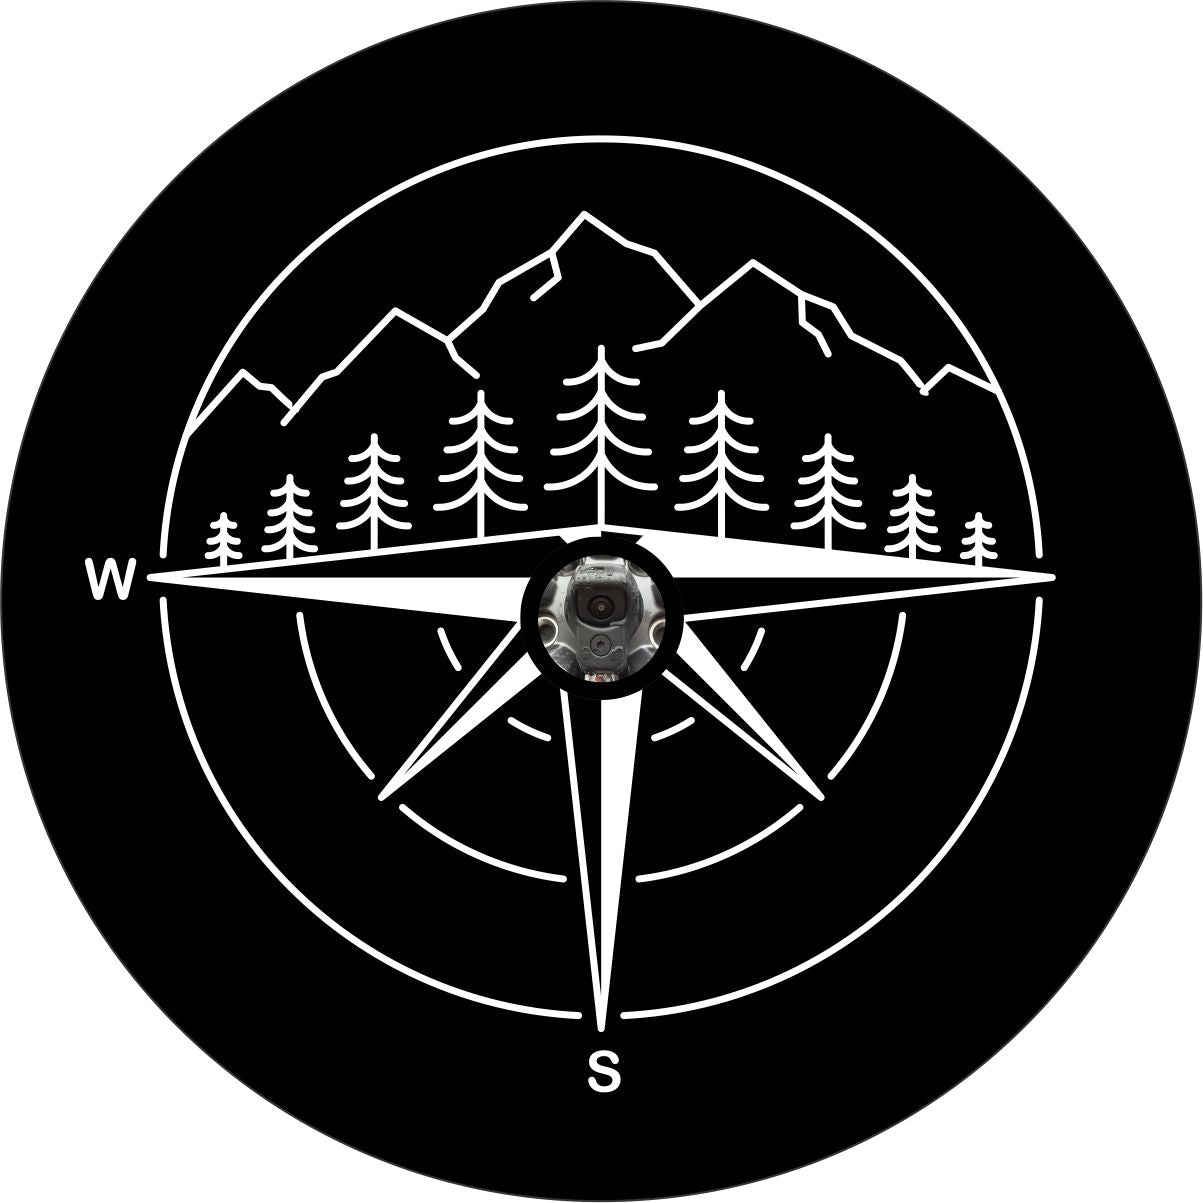 Bottom half of a compass showing south and west with a silhouette of mountains on the north side as a spare tire cover design for any vehicle with a backup camera hole.